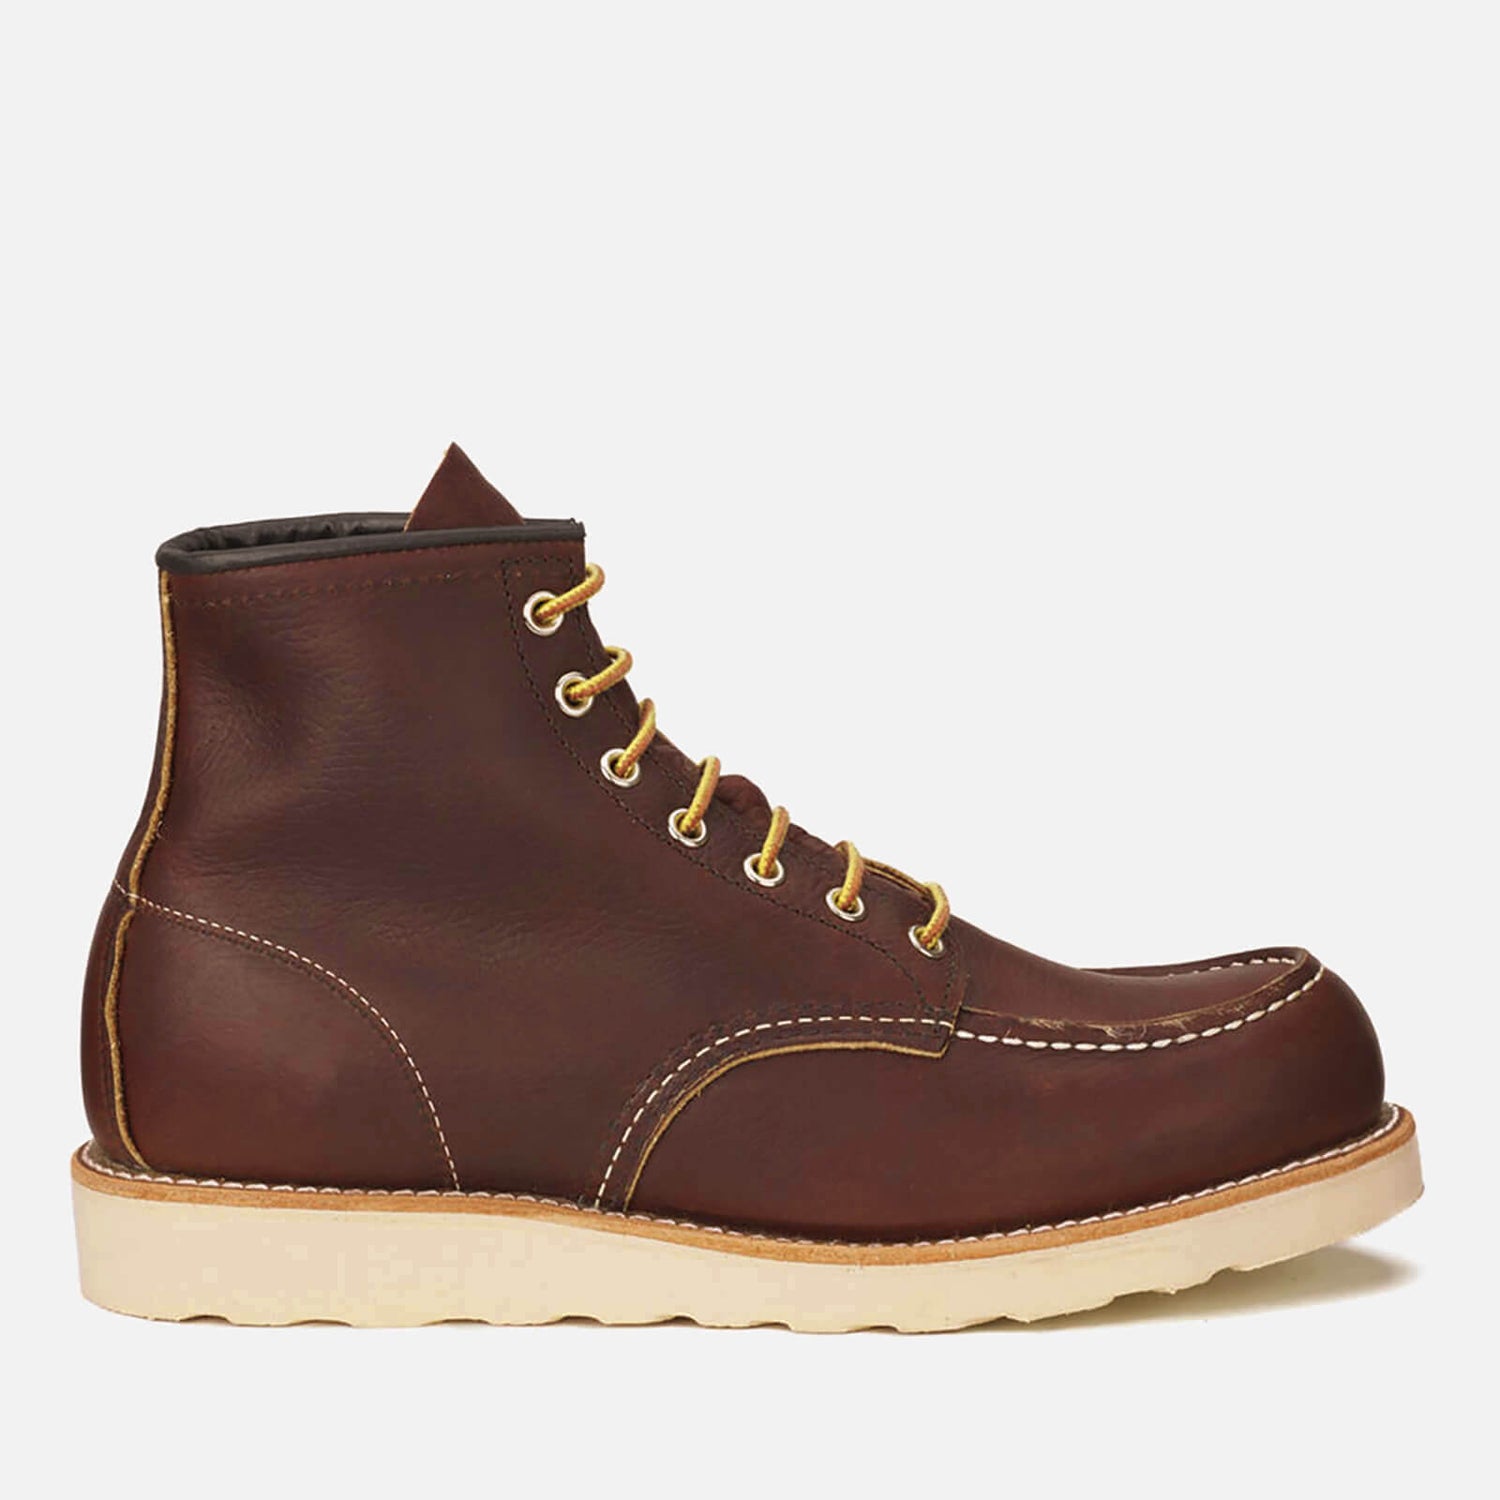 Red Wing Men's 6 Inch Moc Toe Leather Lace Up Boots - Briar Oil Slick